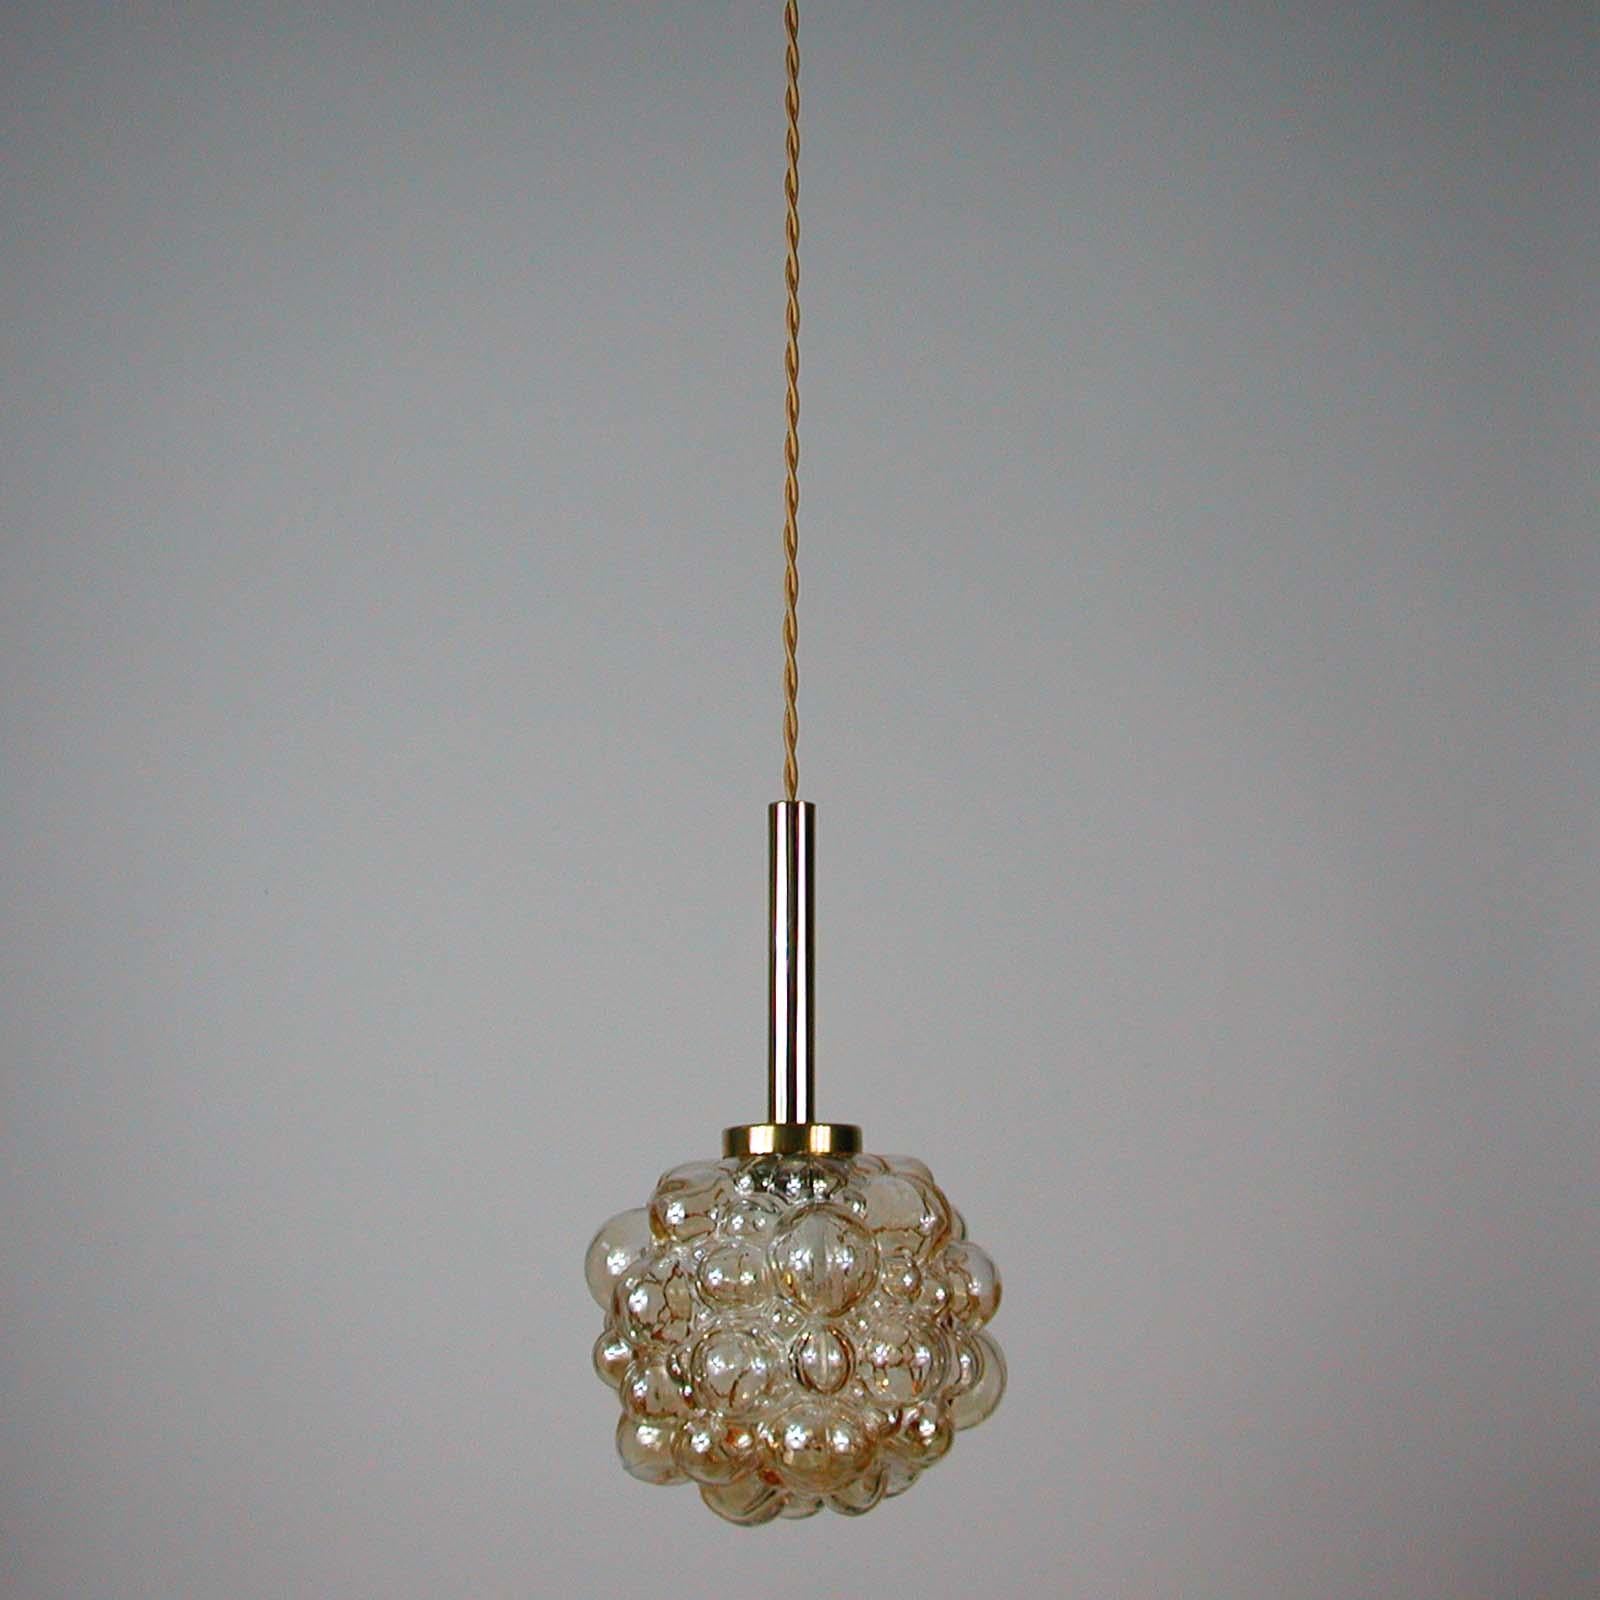 German Midcentury Amber Bubble Pendant by Helena Tynell for Limburg, 1960s